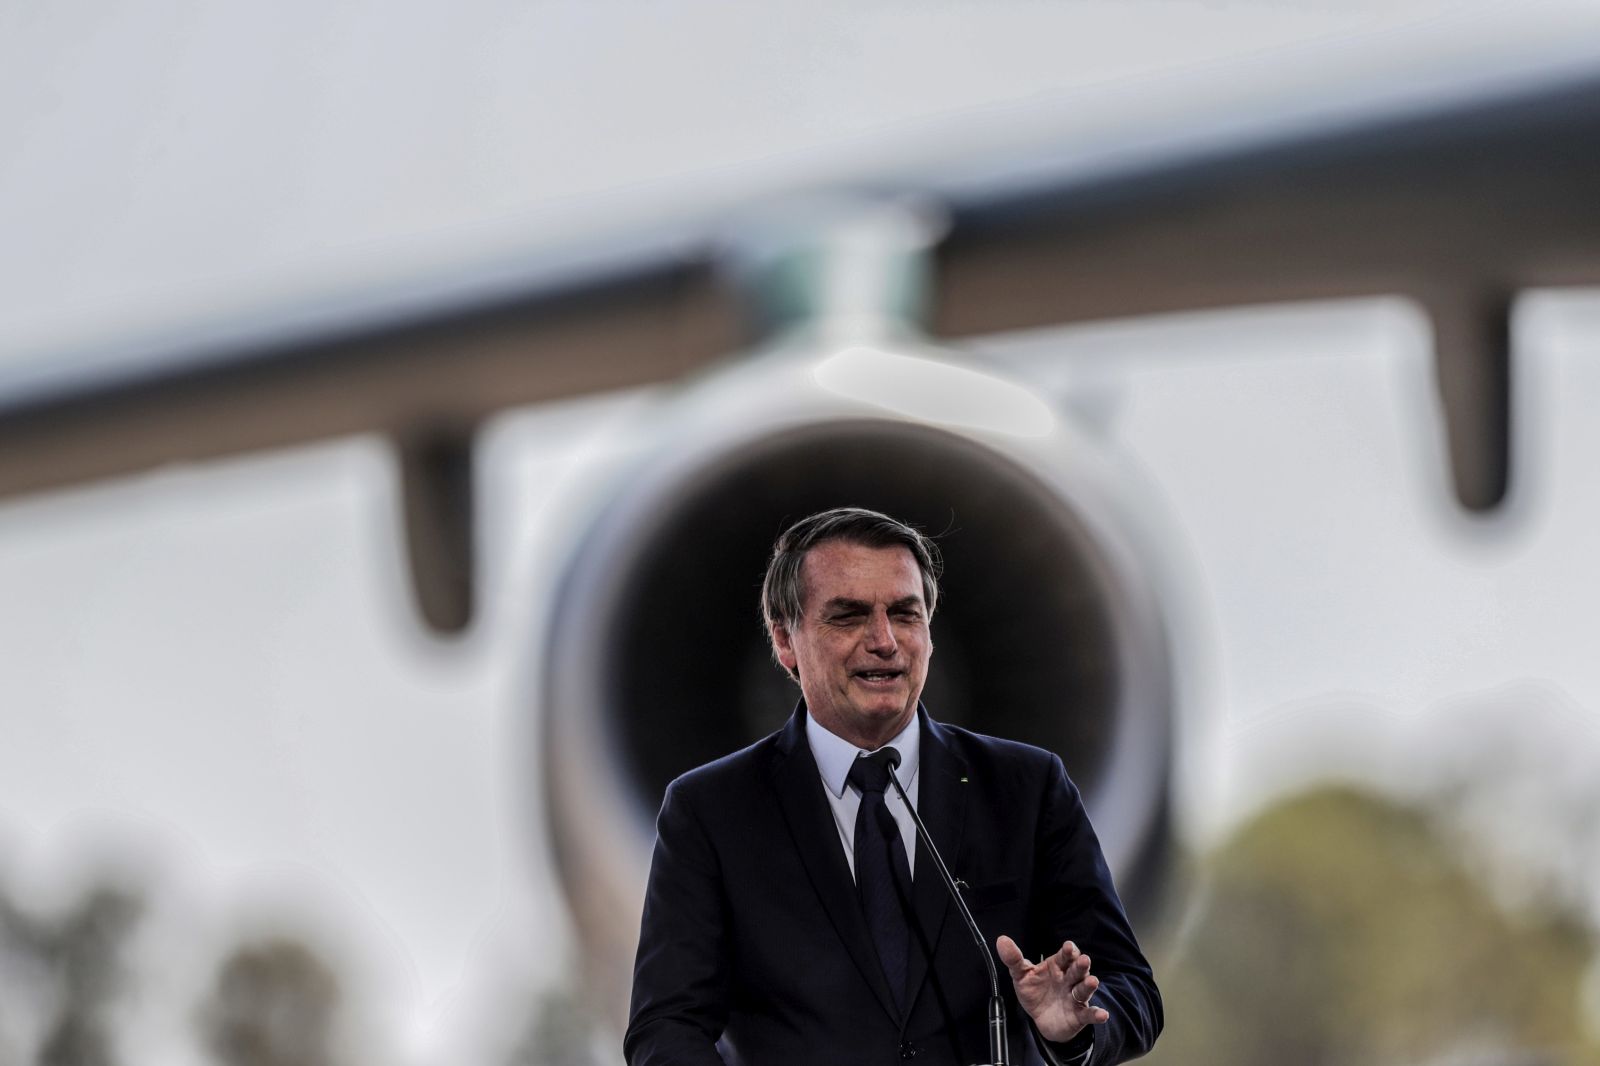 Distorted ideas of national greatness: Bolsonaro speaking on the occasion of an aircraft delivery to the military in September 2019.